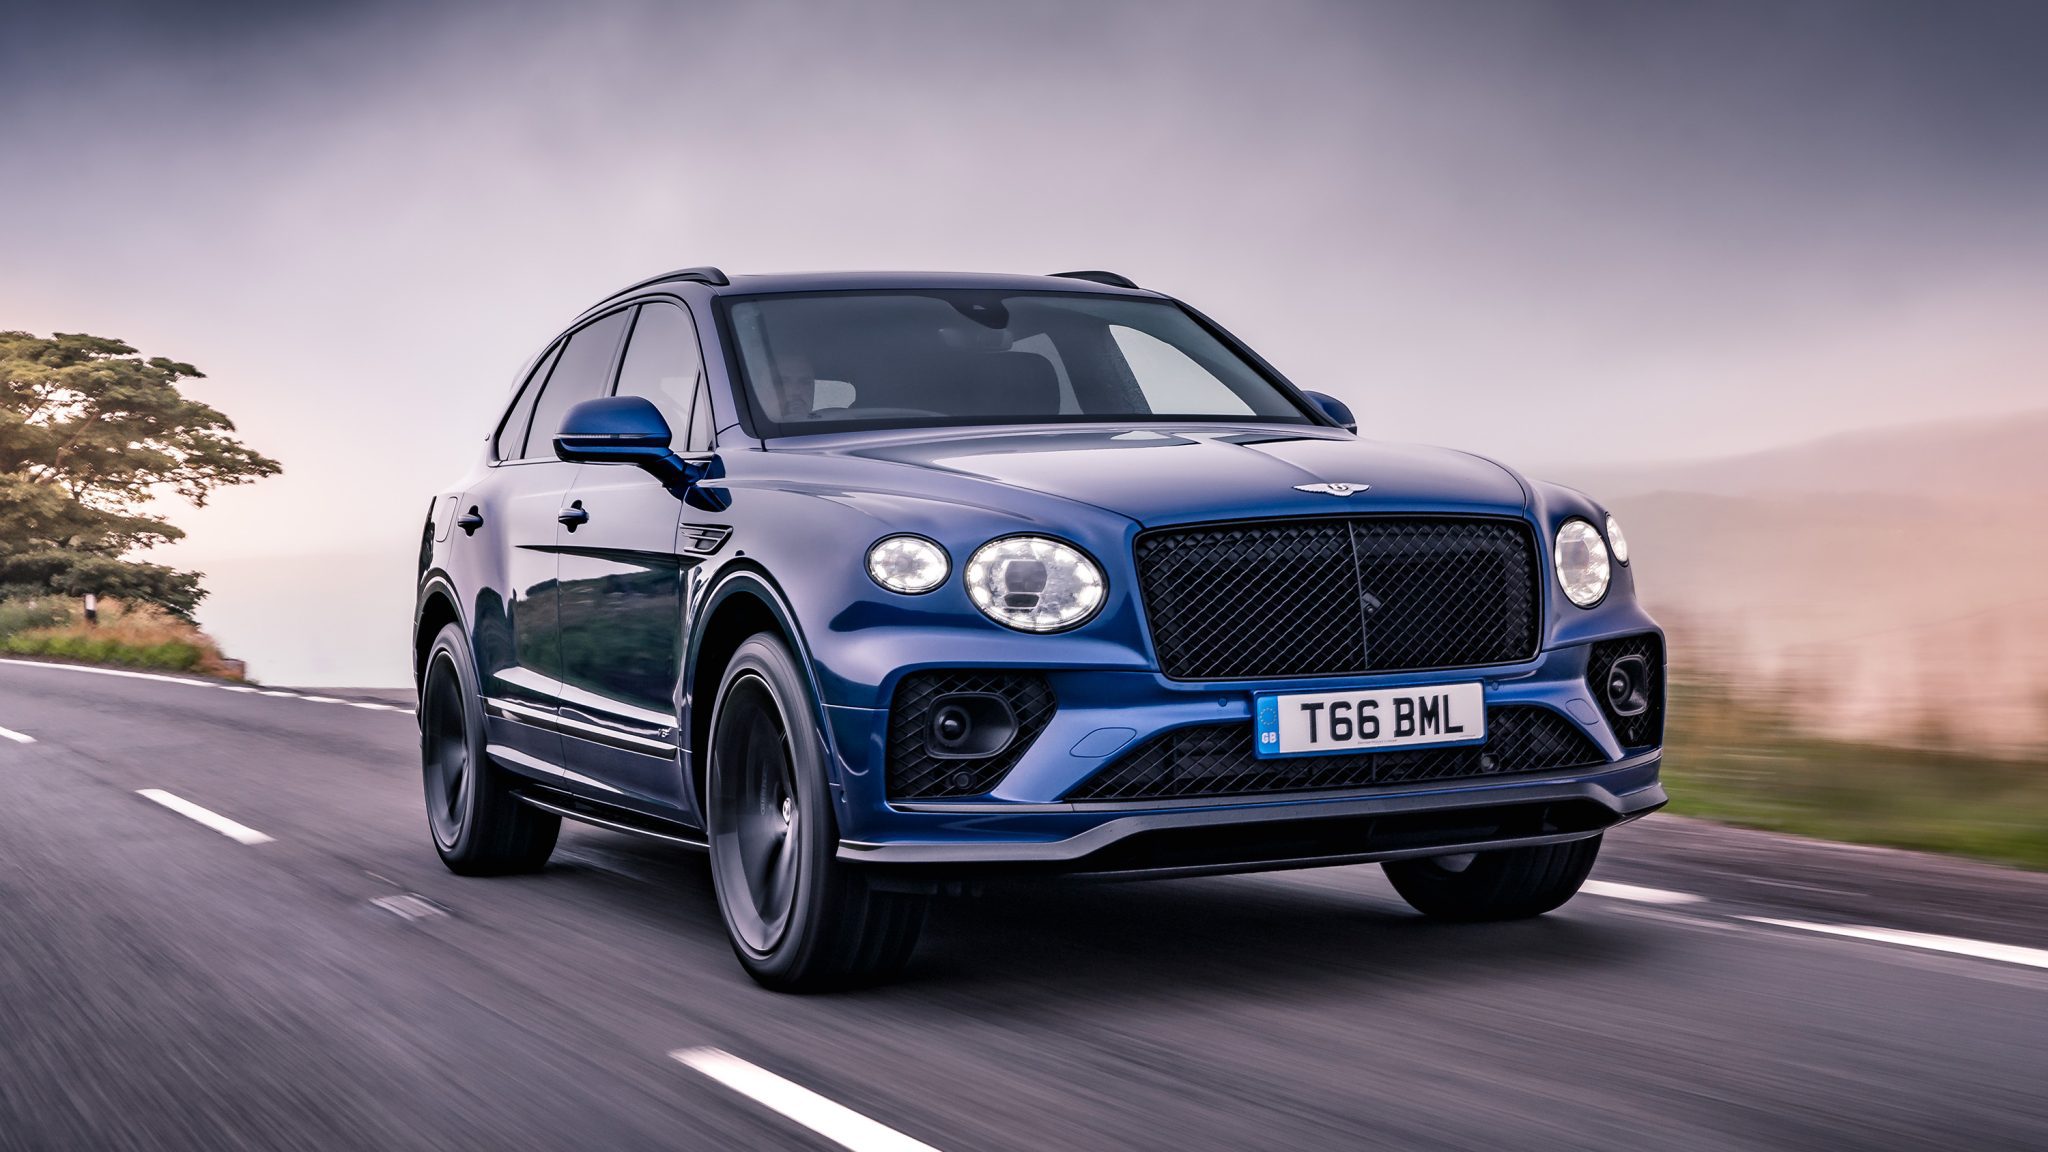 Front angled view of a blue Bentley Bentayga